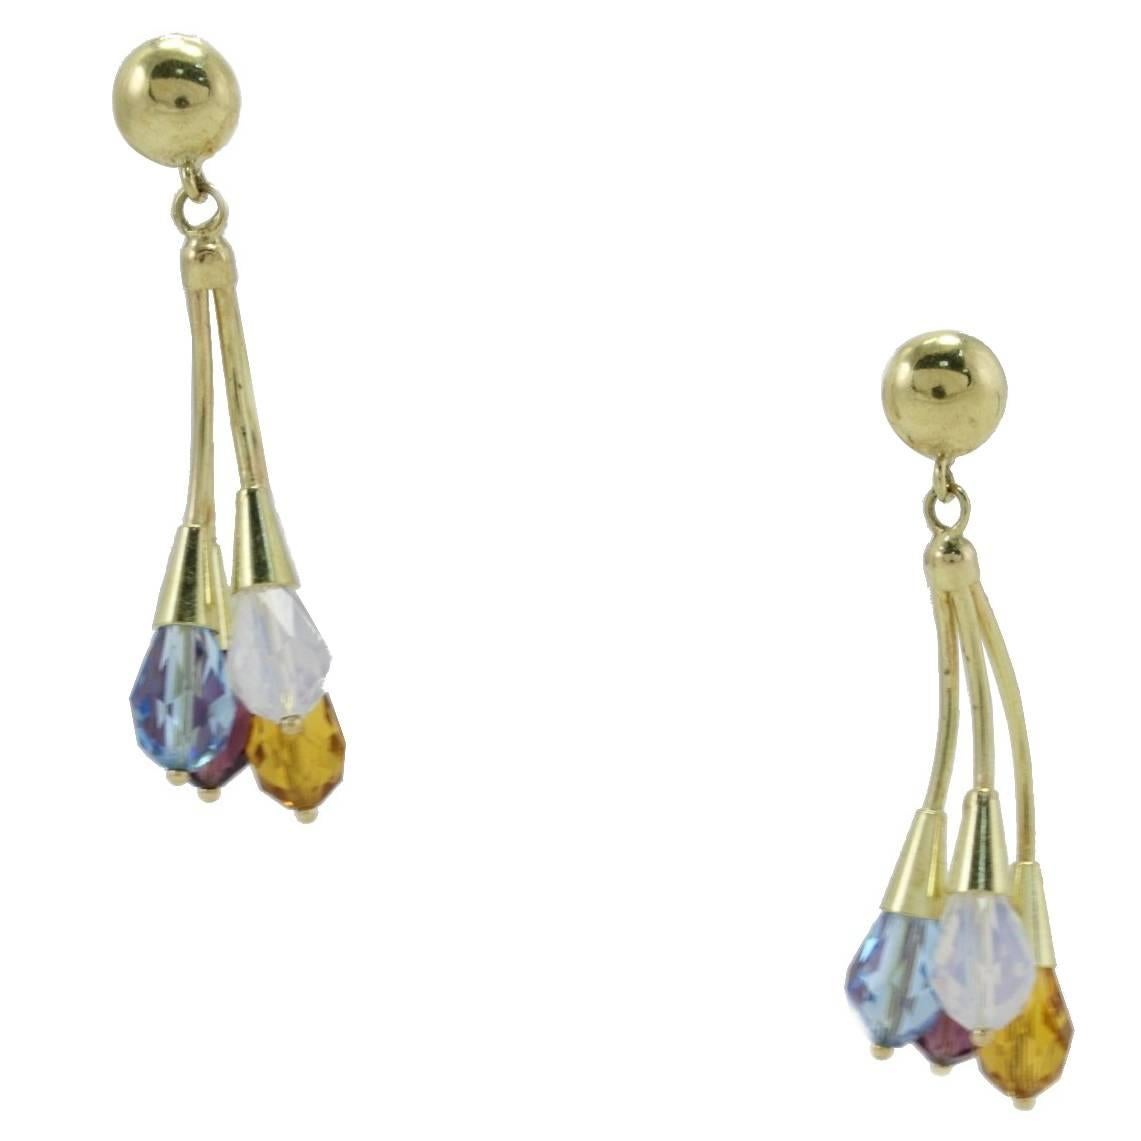 Dangle earrings in 18k yellow gold with four colored stones each.
Tot.Weight 8.60 gr
Ref gief